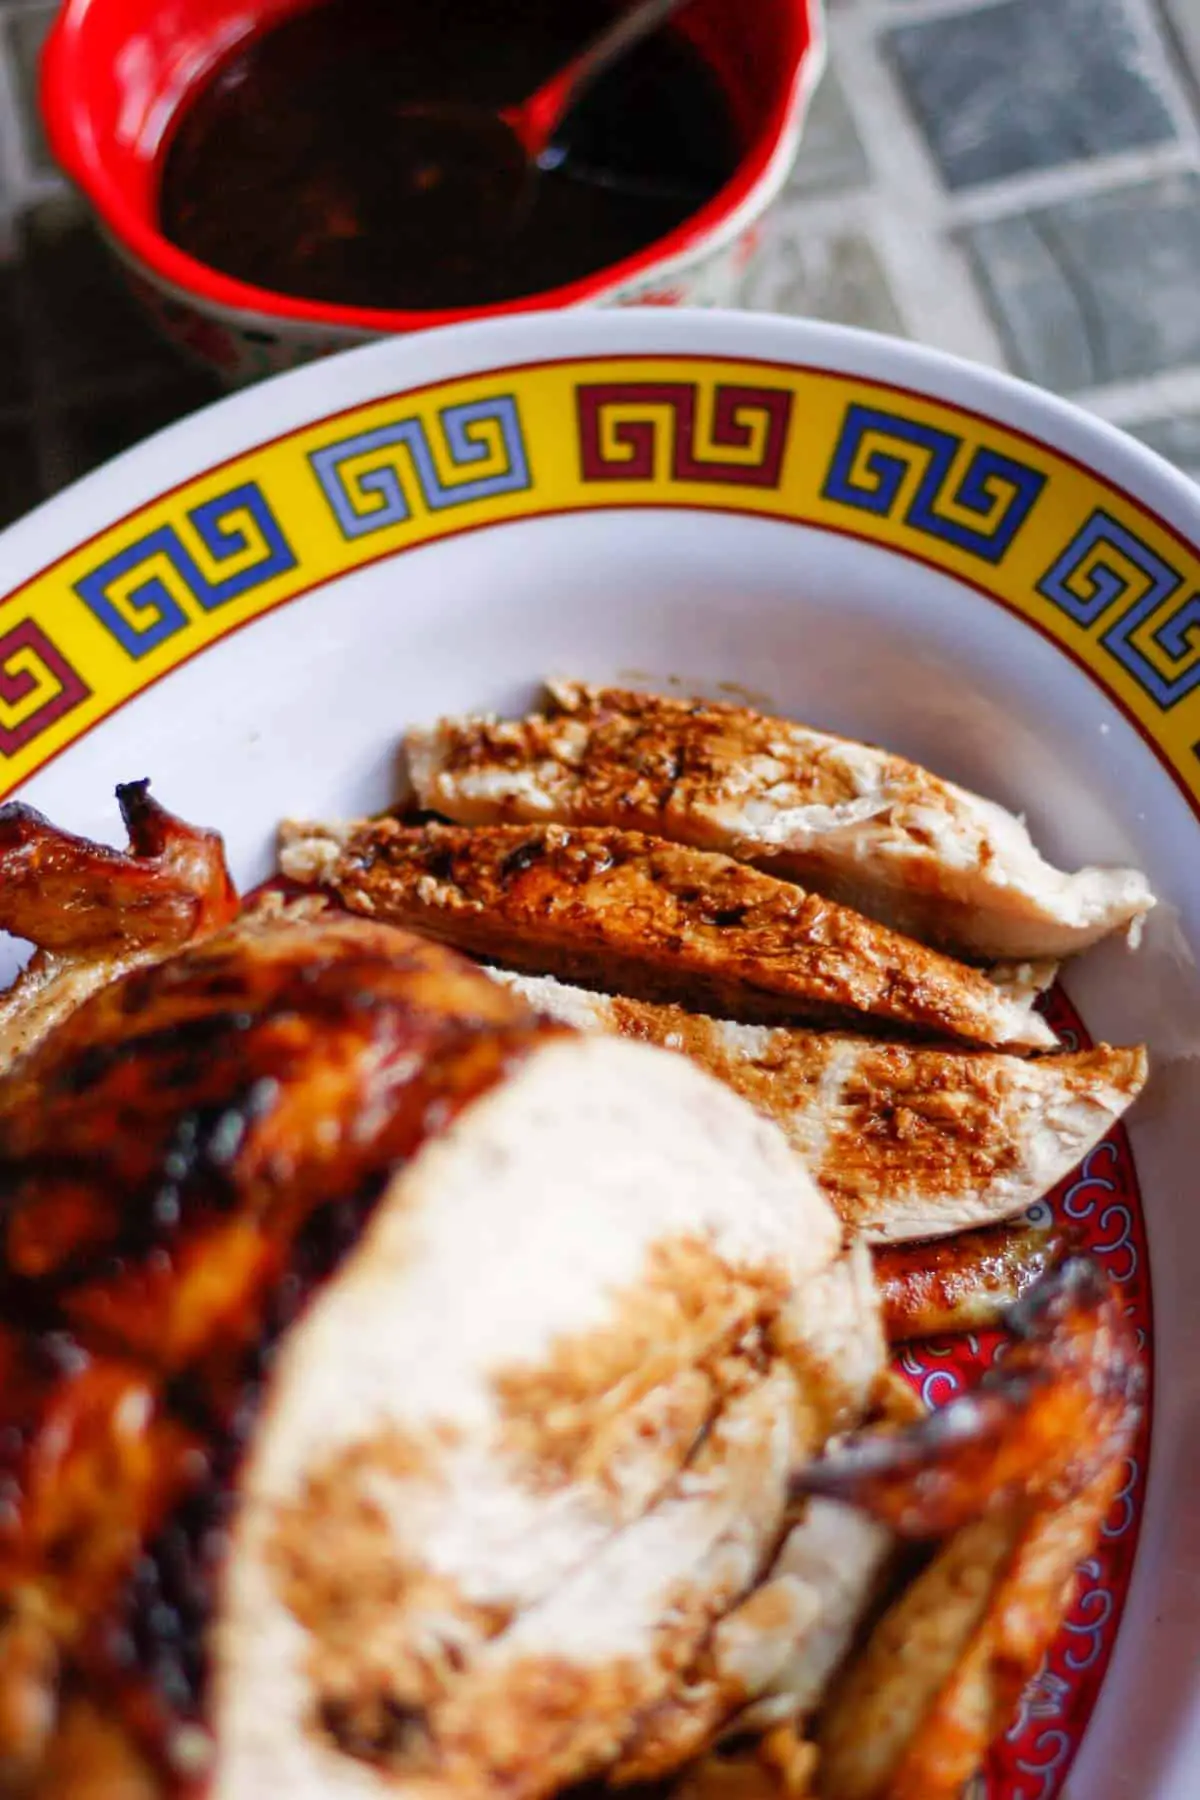 Sliced pieces of cooked chicken and a portion of a whole chicken next to the slices on a patterned plate with a red bowl filled with a soy based sauce next to the plate some of the sauce has been drizzled over the chicken.